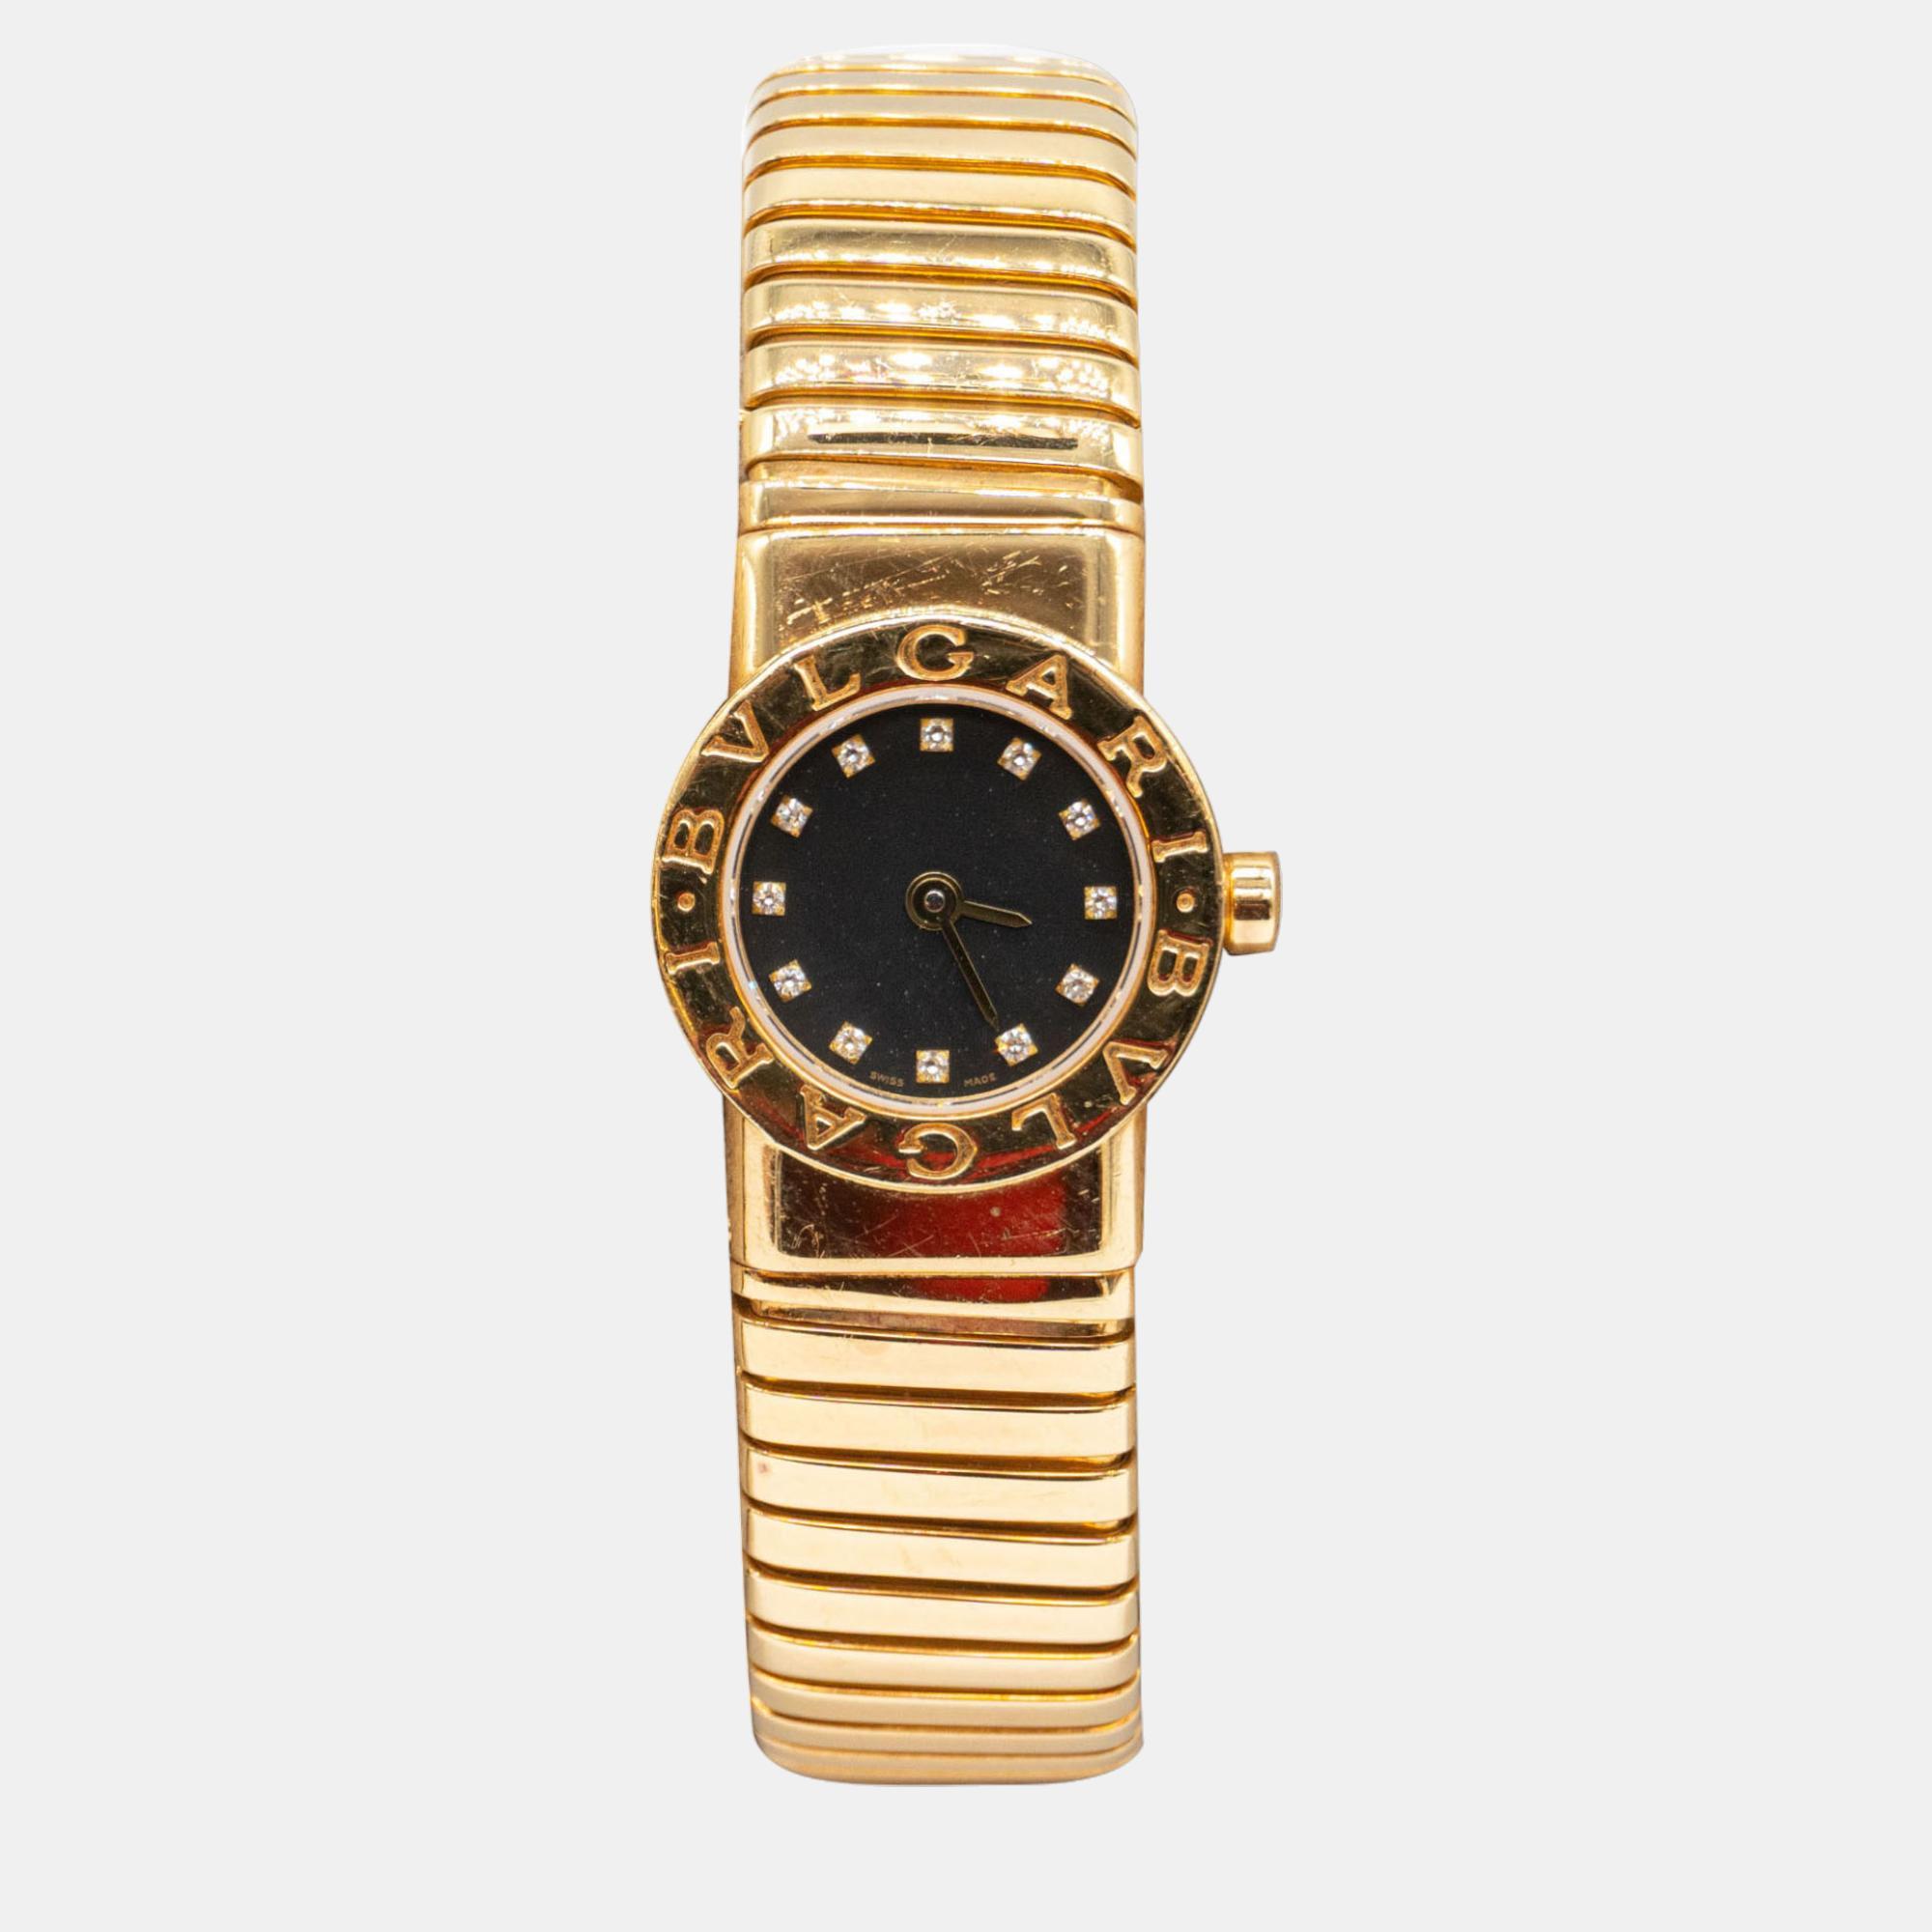 Bvlgari vintage expandable tubogas bb19 2t watch with diamonds in 18k yg (mini model)